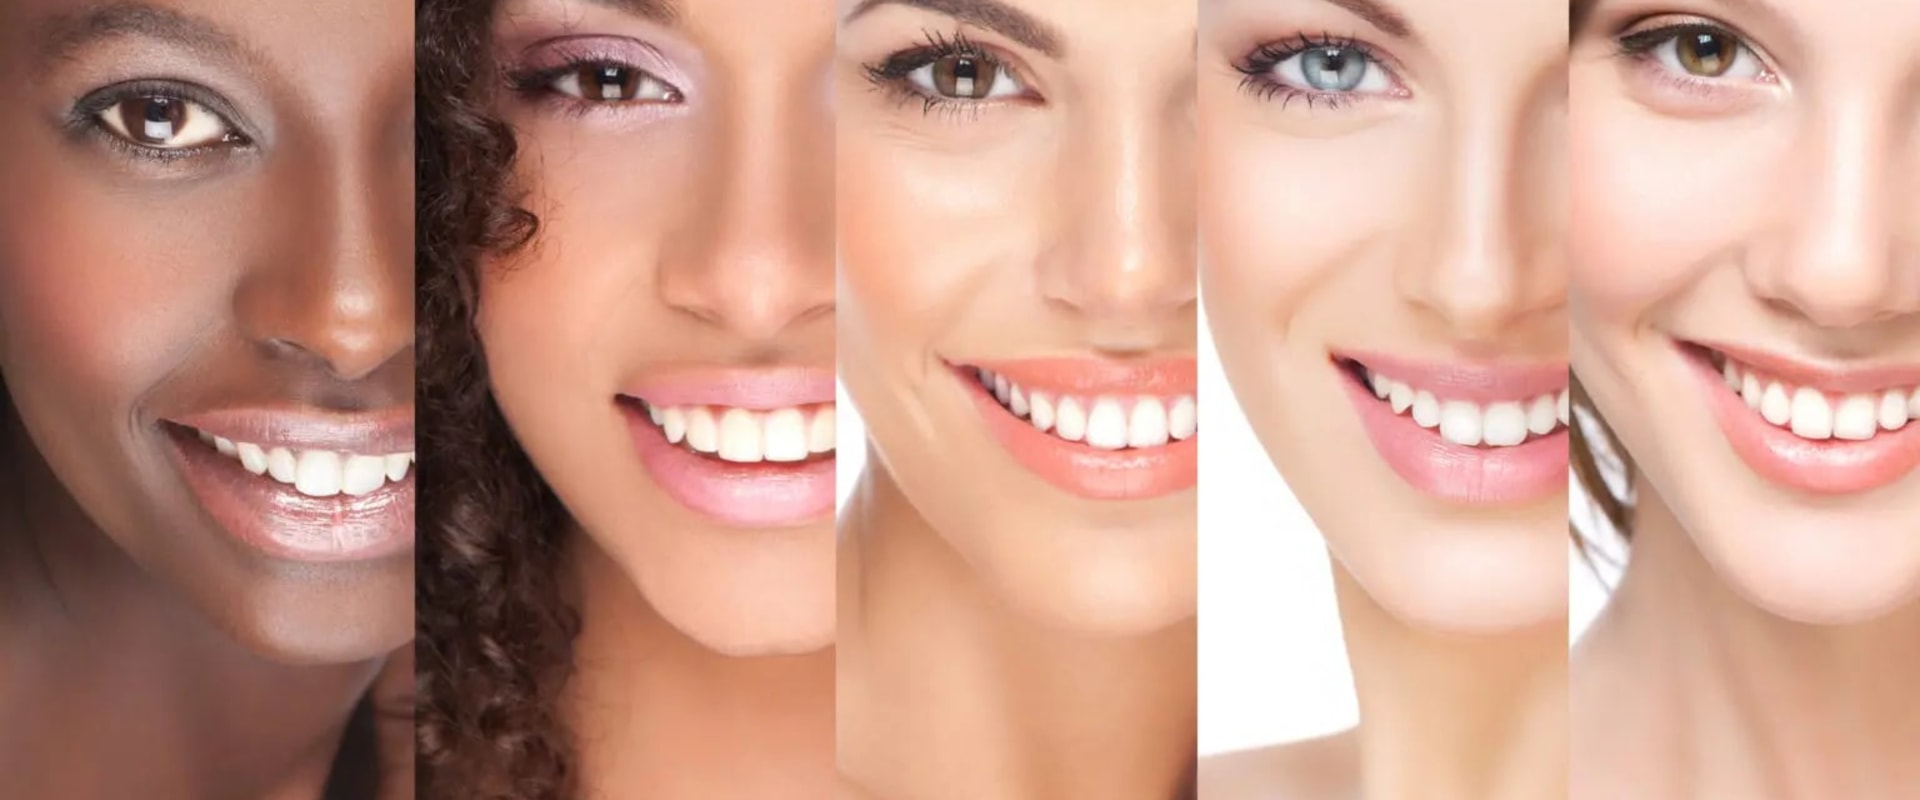 Achieving The Perfect Smile: How Laser Dentistry Can Help With Gum Contouring In Taylor, TX